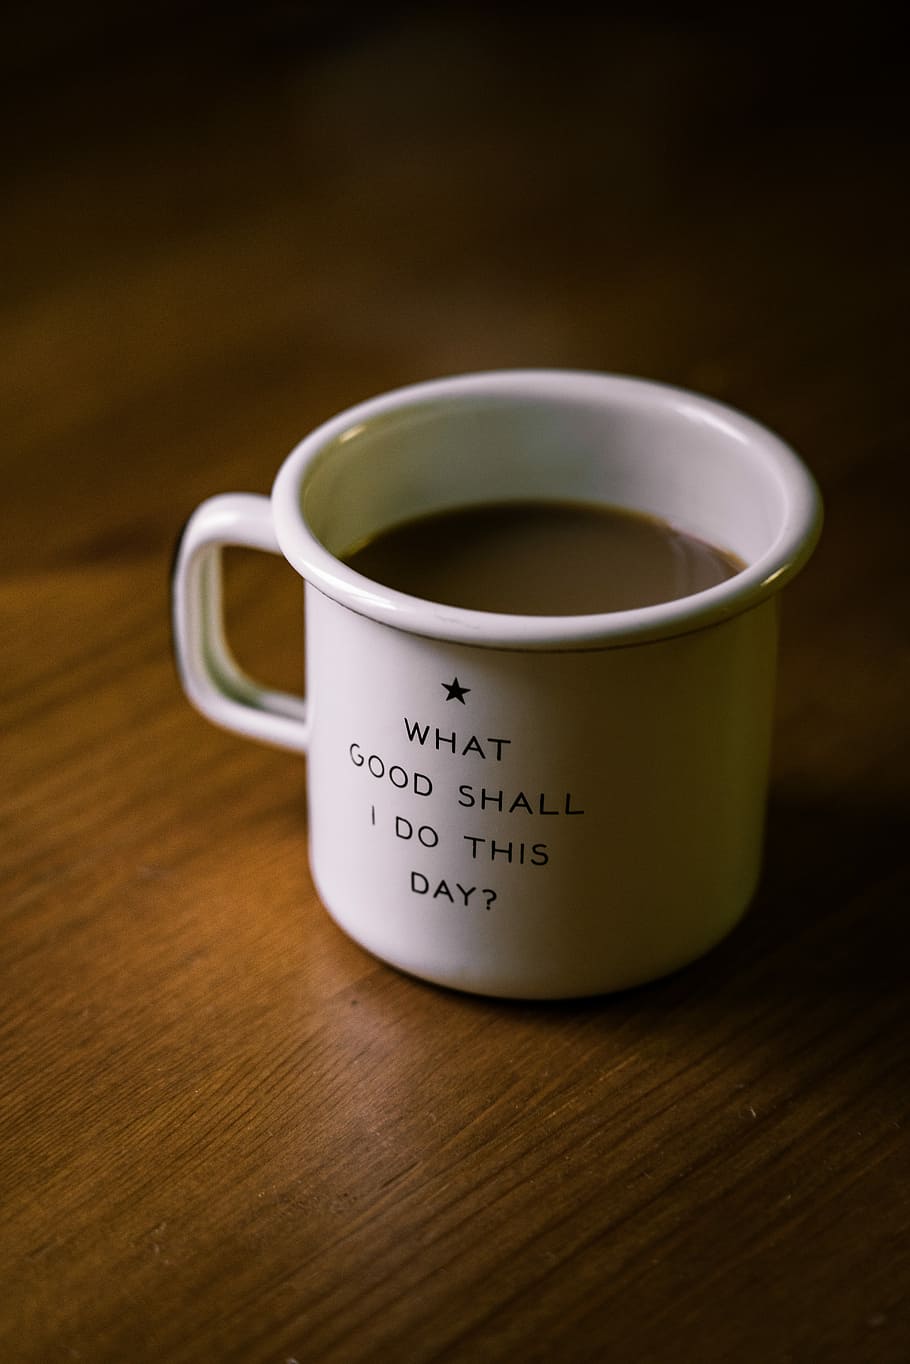 white and black ceramic cup filled with brown liquid on brown wooden sufface, white and black what good shall i do this day?-printed ceramic mug filled with coffee on brown wooden table